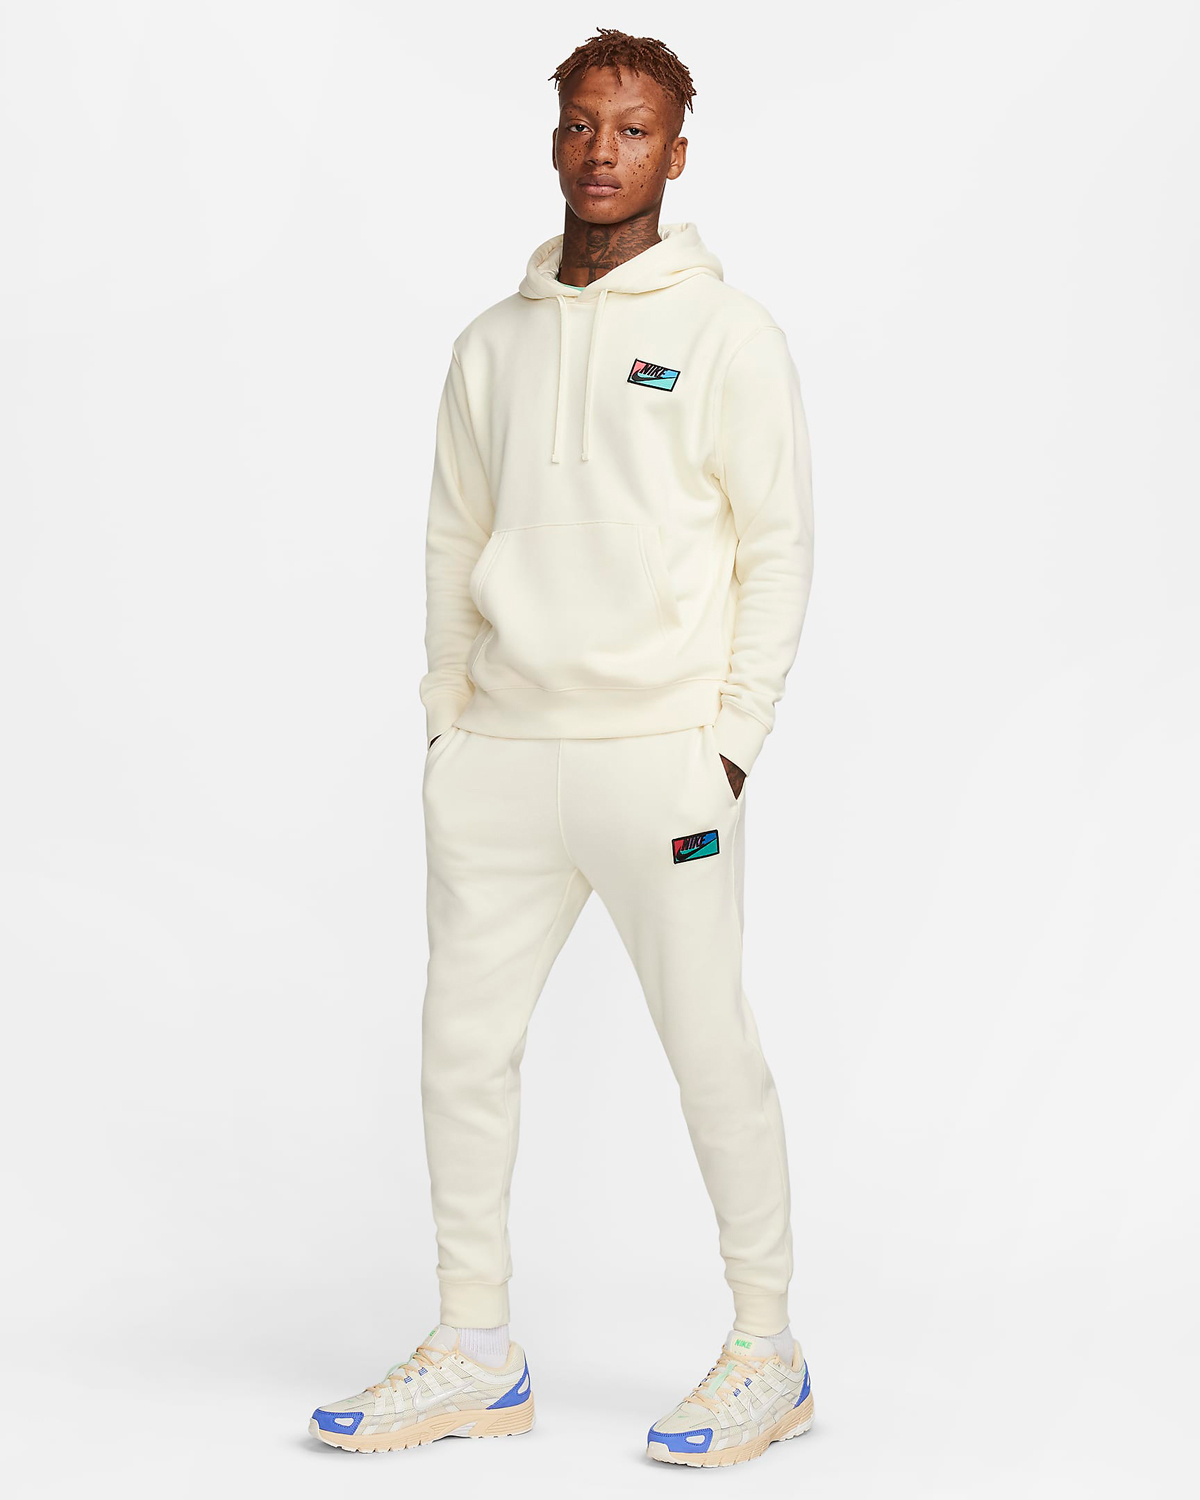 Nike Coconut Milk Clothing Sneakers Outfits